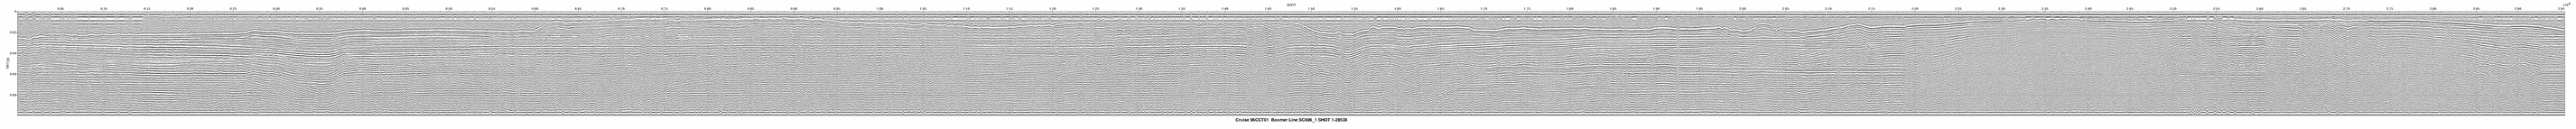 SC696_1 seismic profile thumbnail image with link to full size image